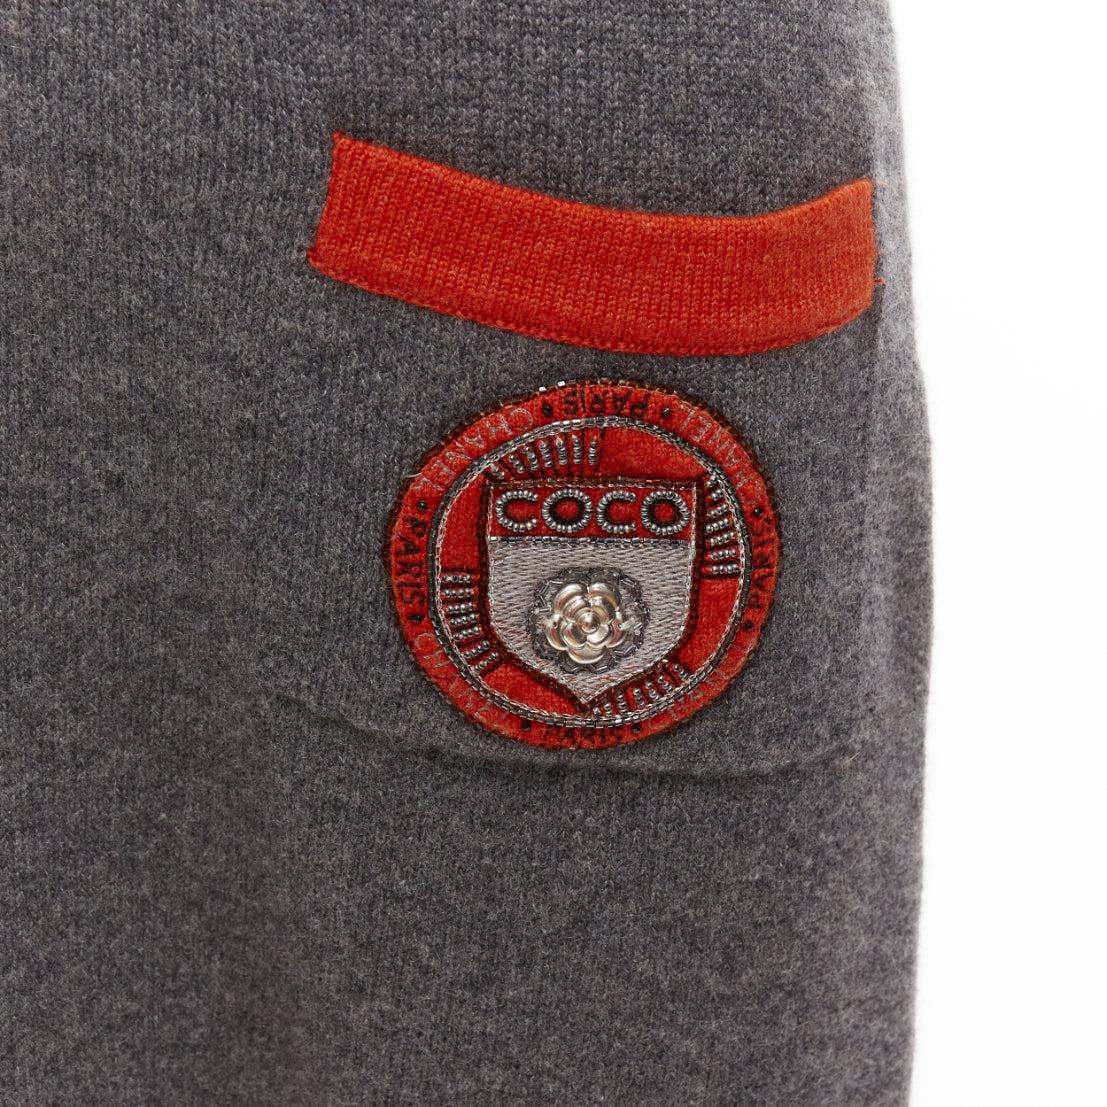 CHANEL 07A 100% cashmere grey orange trim COCO logo badge knit dress FR38 M
Reference: NILI/A00039
Brand: Chanel
Designer: Karl Lagerfeld
Collection: 07A
Material: Cashmere
Color: Orange, Grey
Pattern: Solid
Closure: Pullover
Extra Details: COCO